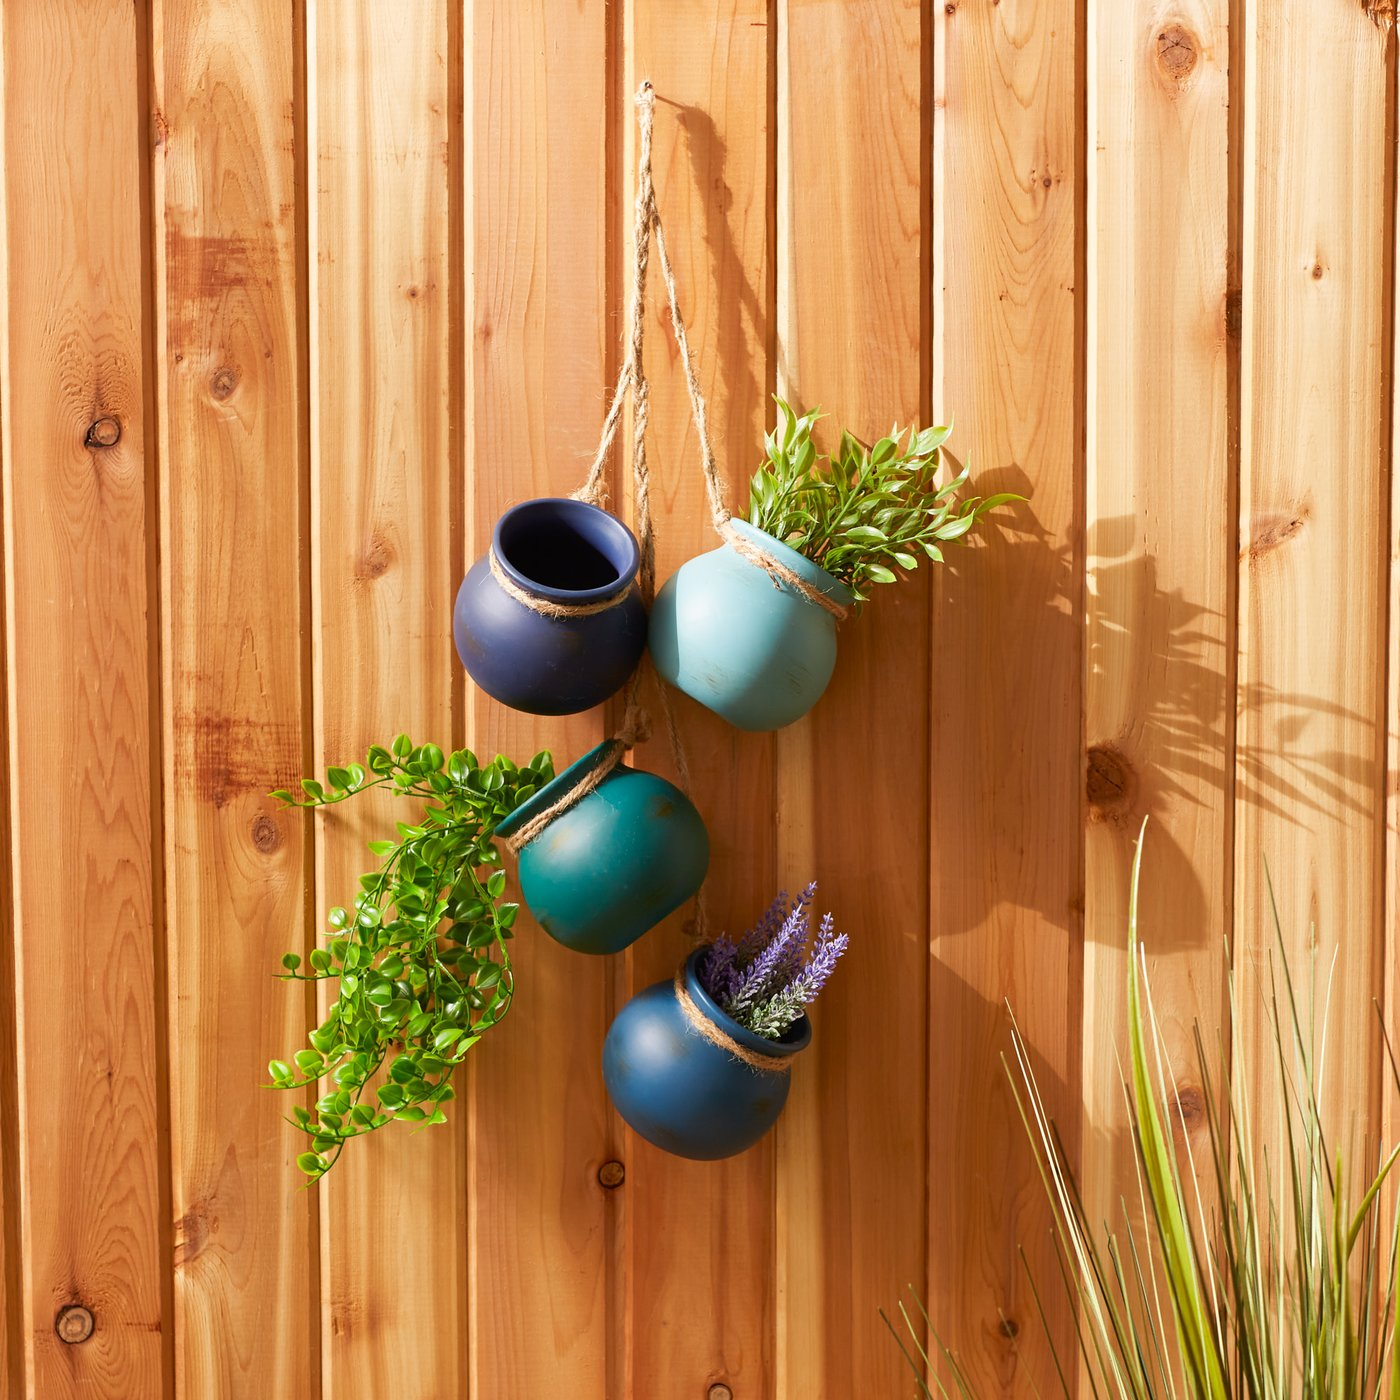 Dangling Pots Decor in Blue Tones - Ethereal Company